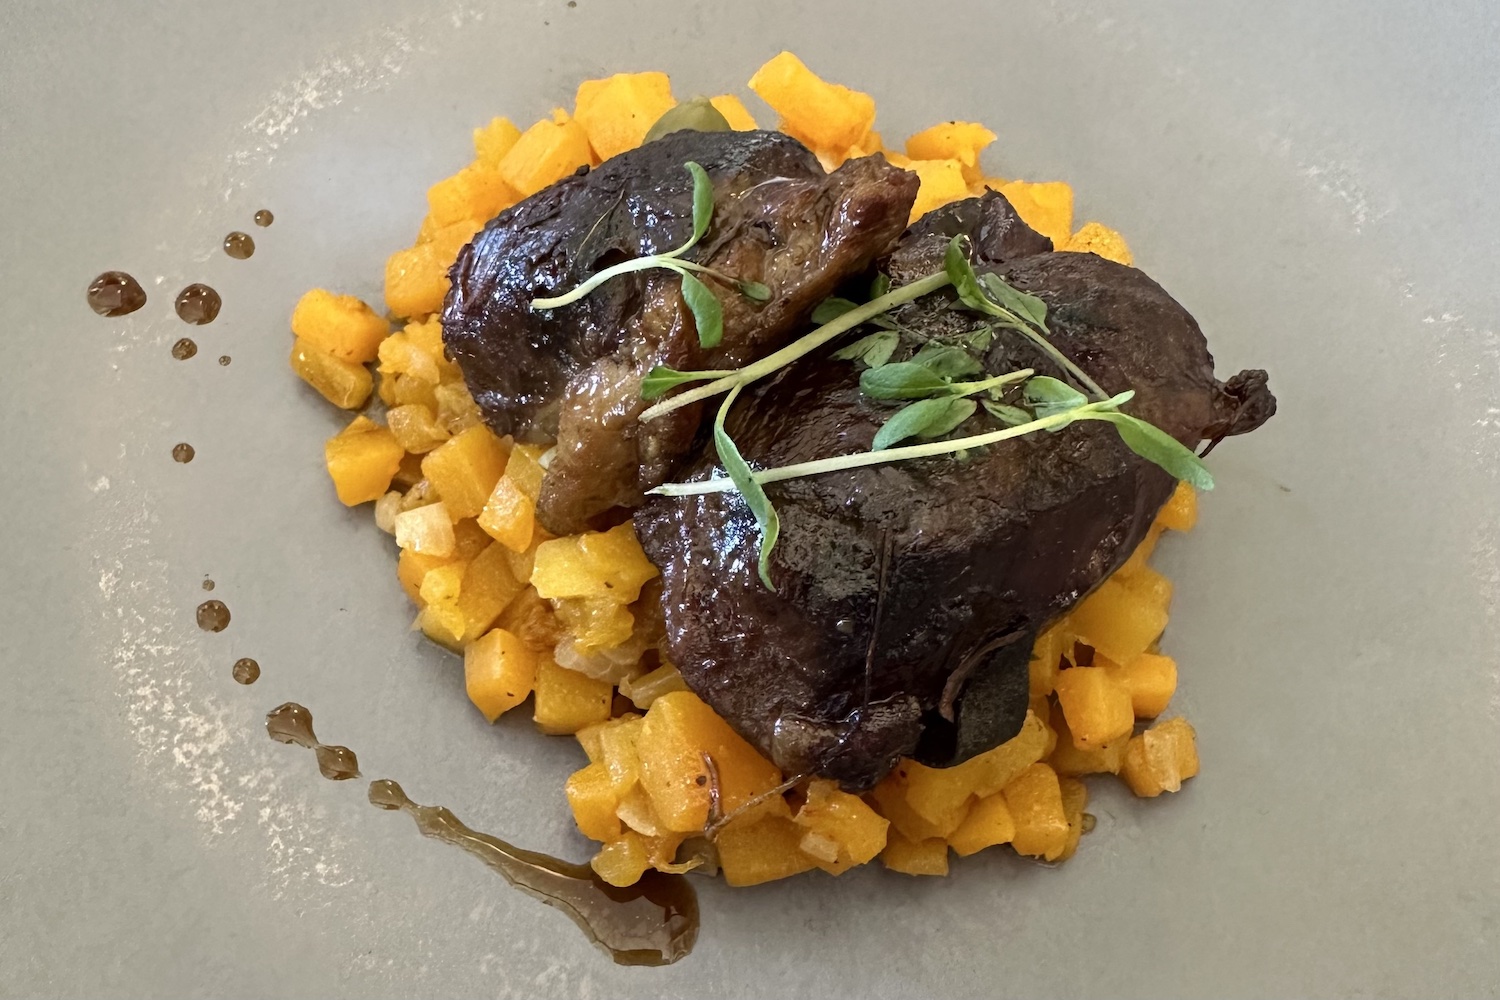 Braised beef with squash from Côté Mas in france